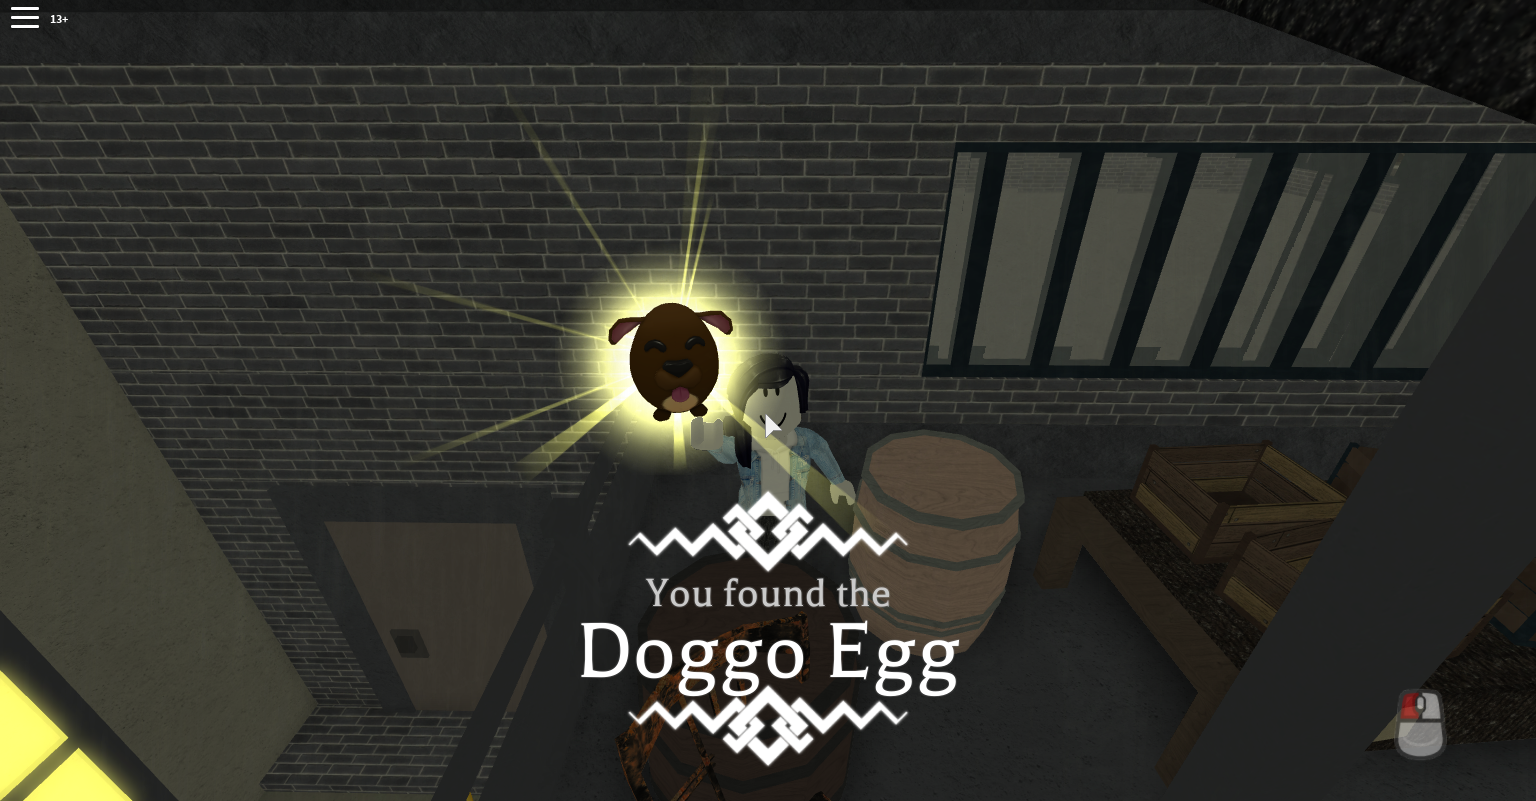 Aveyn S Blog Roblox Egg Hunt 2018 How To Find All The Eggs In - 1 doggo egg